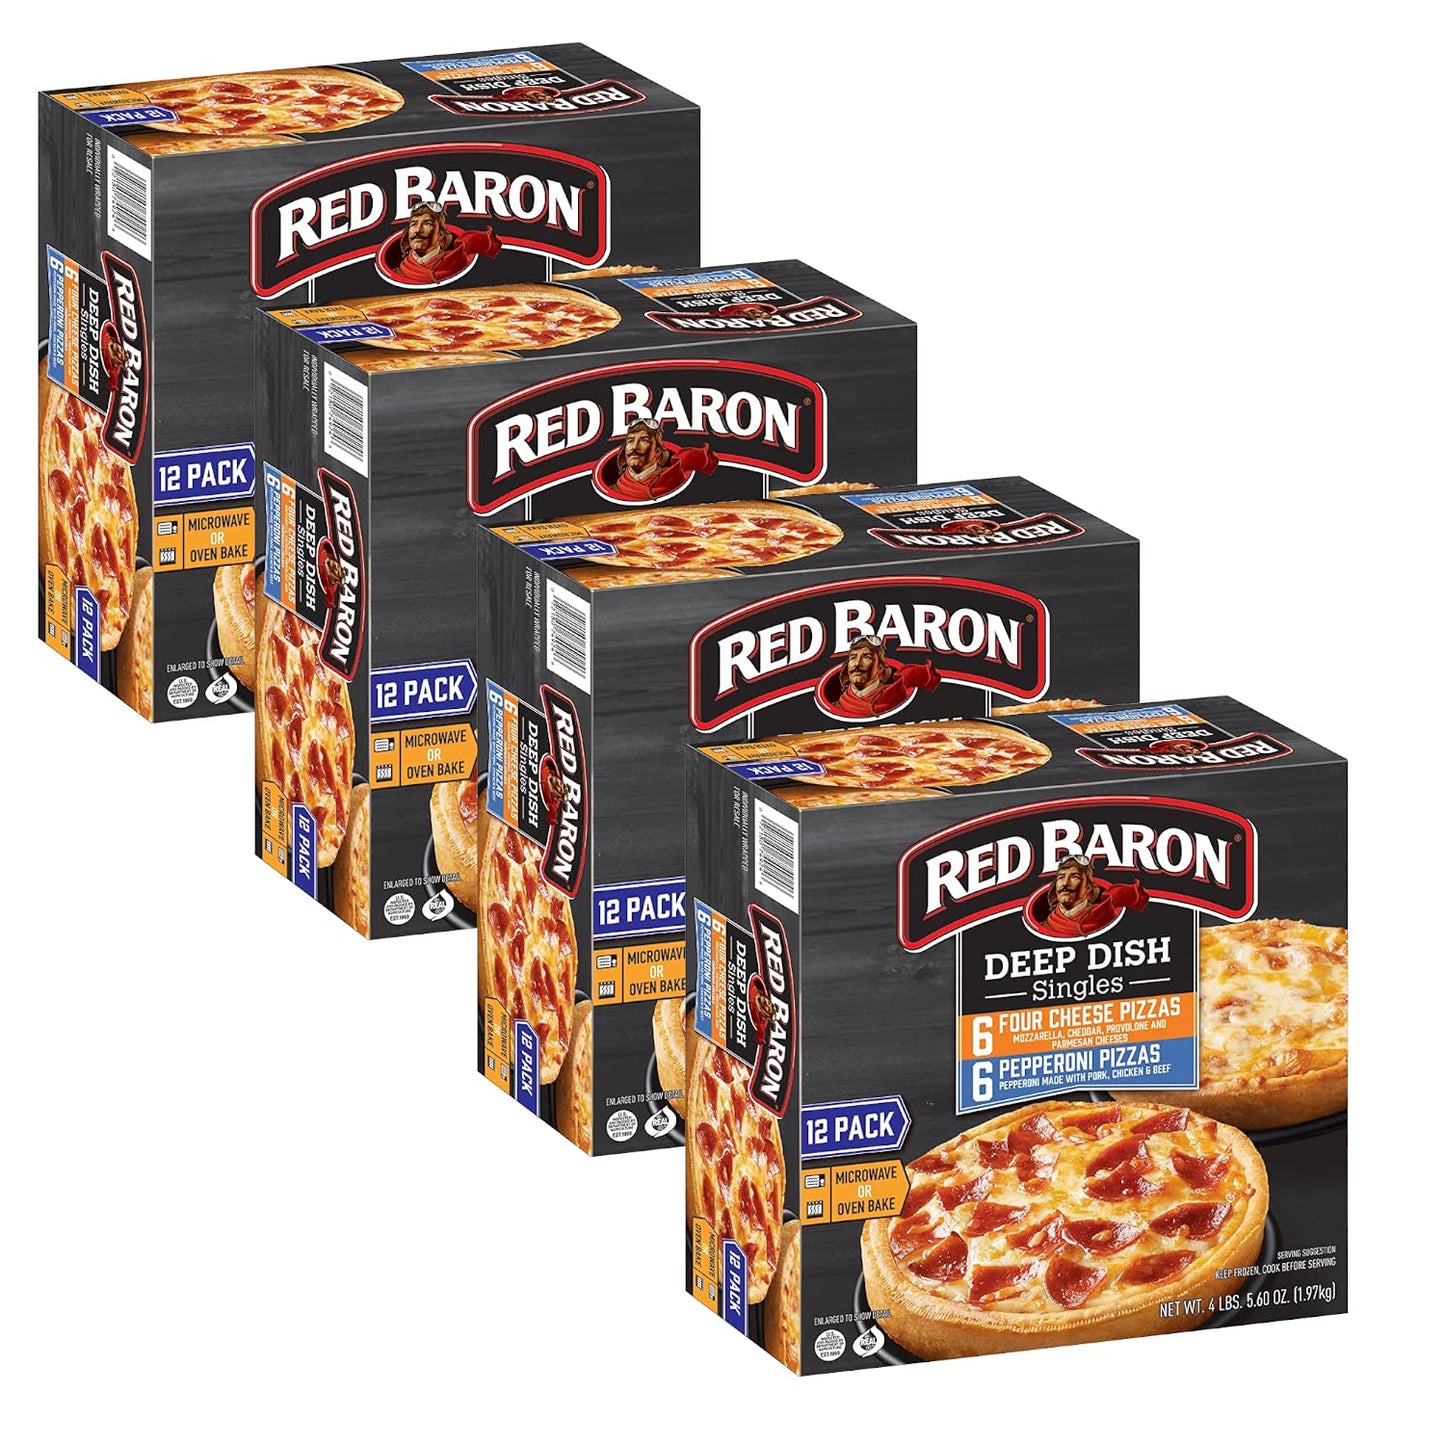 Red Baron Deep Dish Pizza Singles, Variety Pack